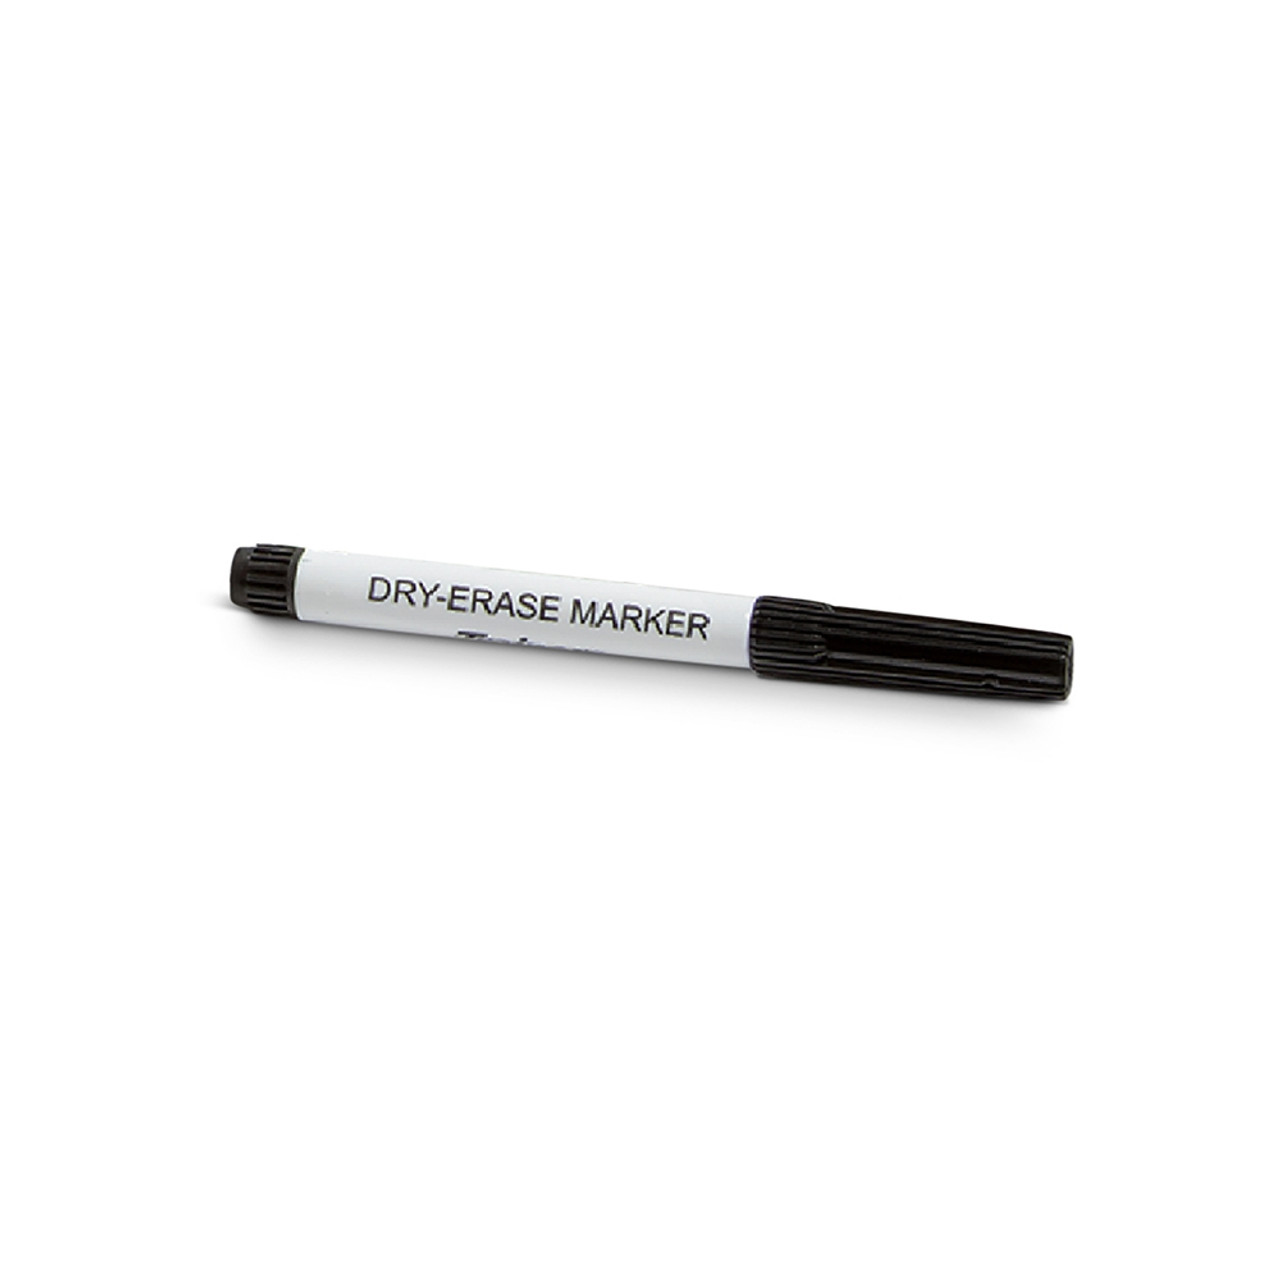 Dry-erase Whiteboard Marker with Velcro